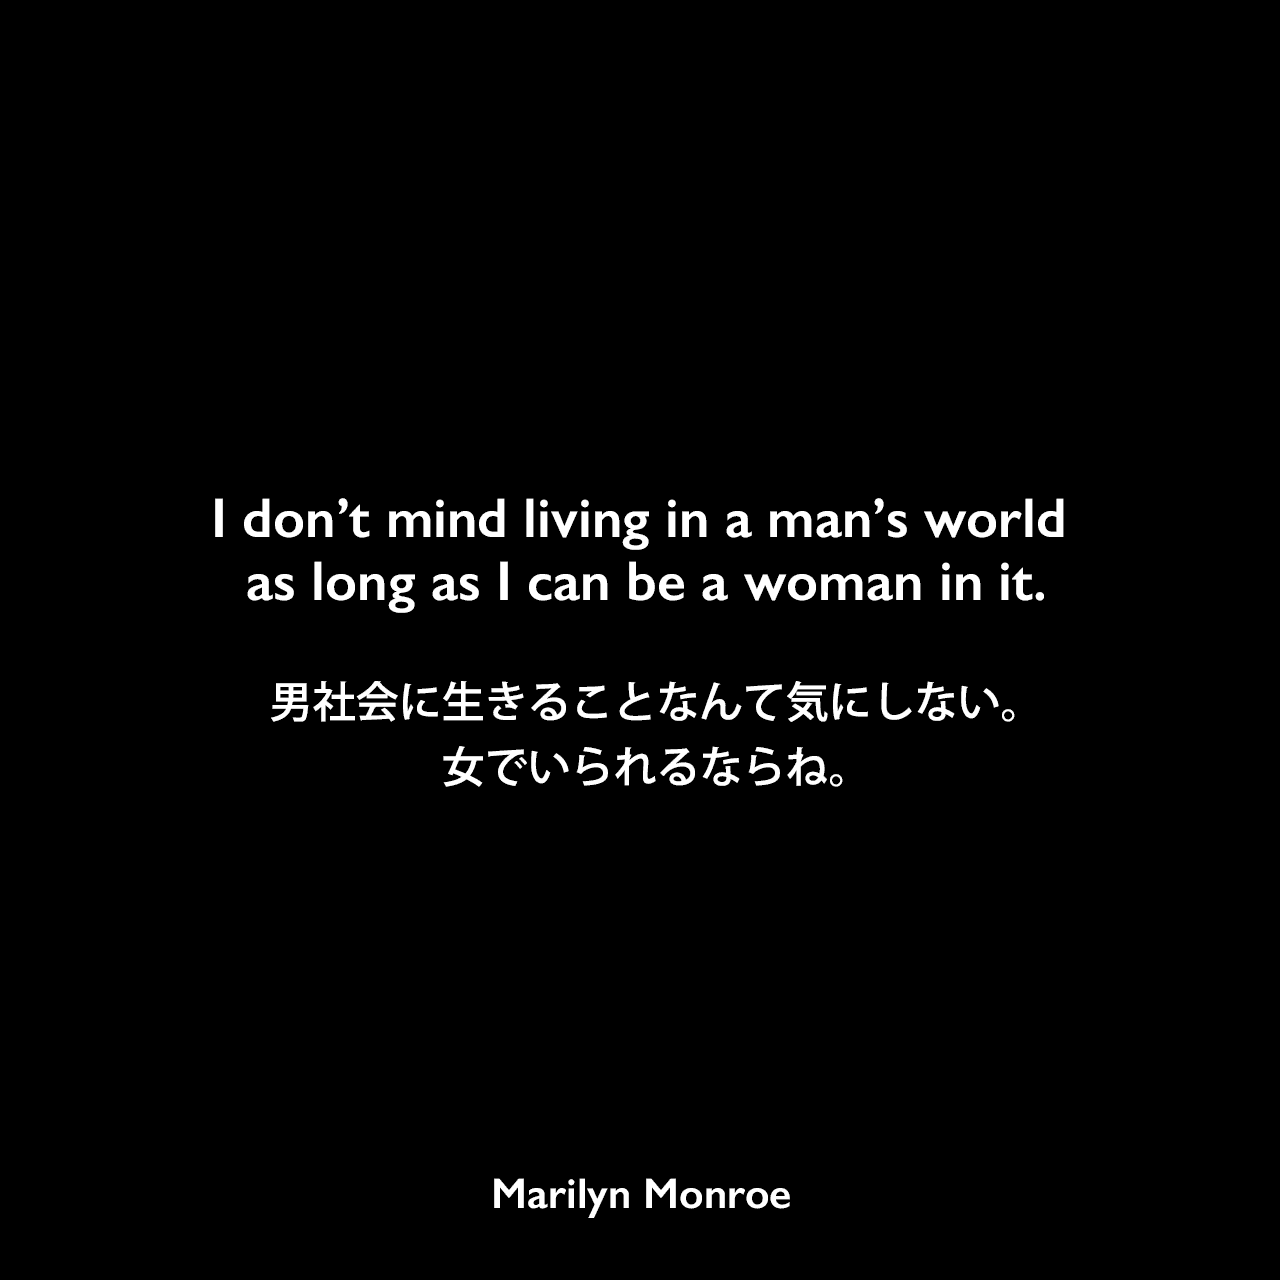 I don’t mind living in a man’s world as long as I can be a woman in it.男社会に生きることなんて気にしない。女でいられるならね。Marilyn Monroe